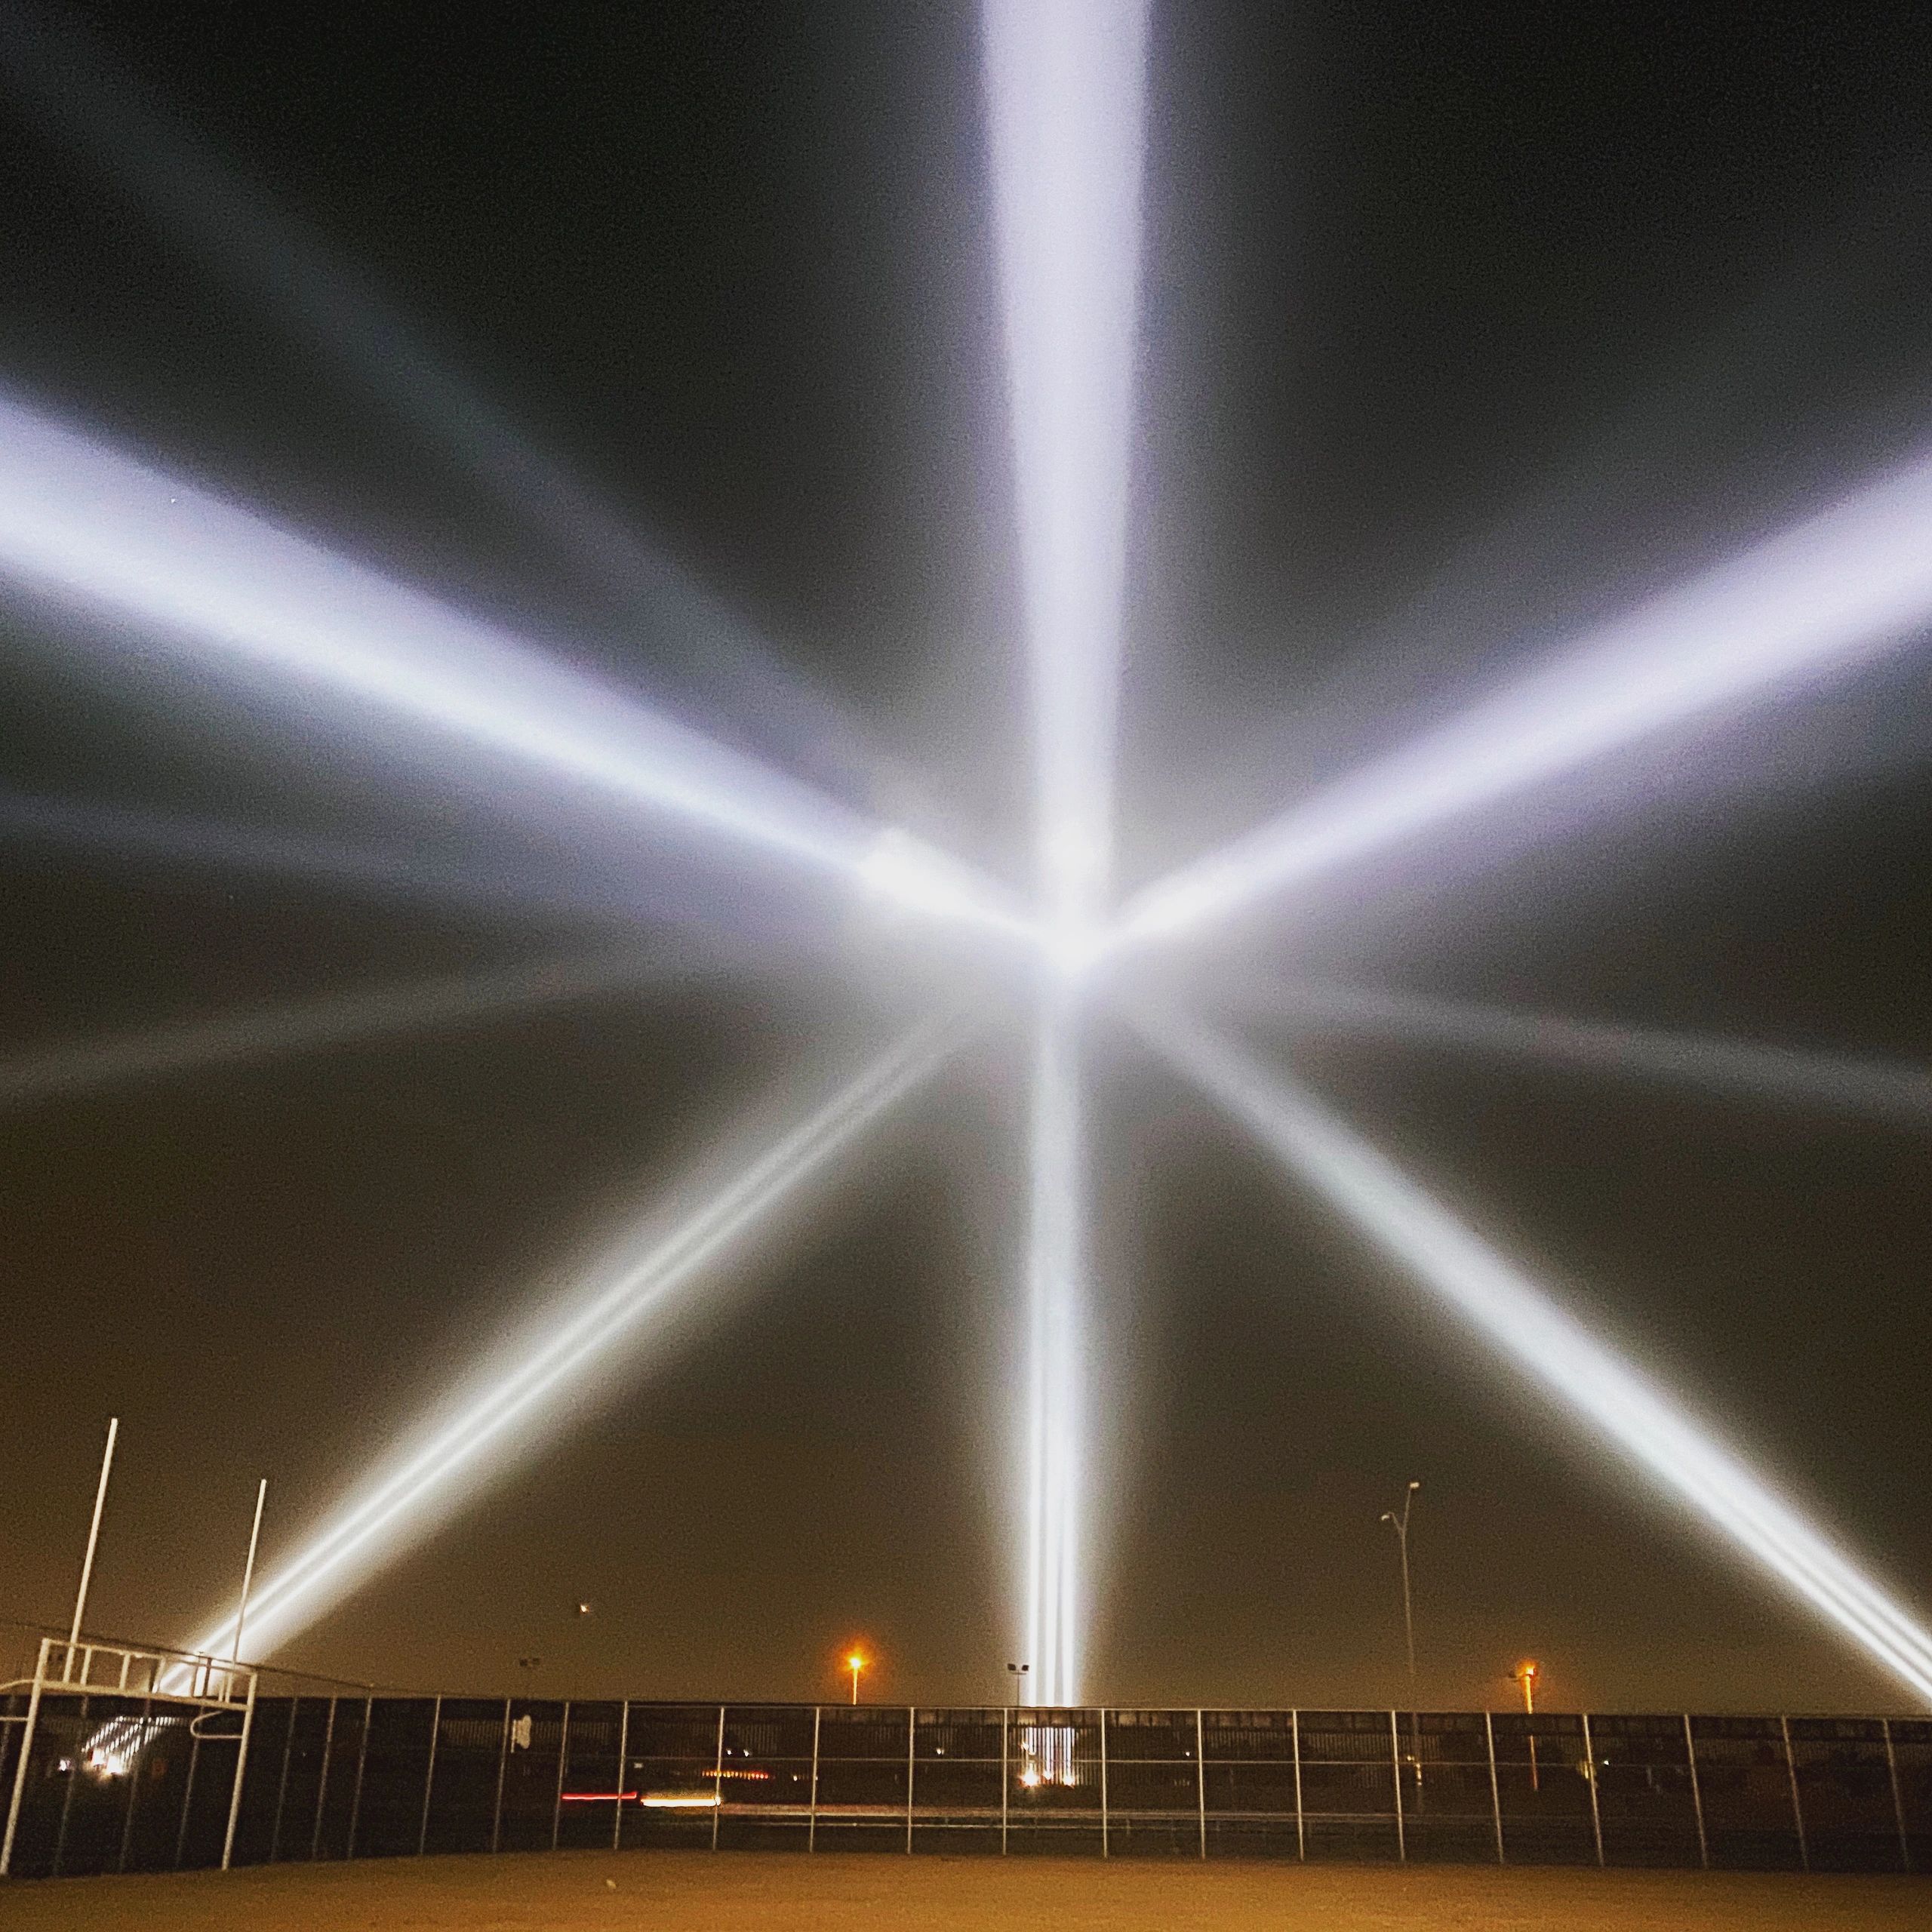 Syncrolite - Beams of light 
#bctentertainment #production3d #bctchad #3